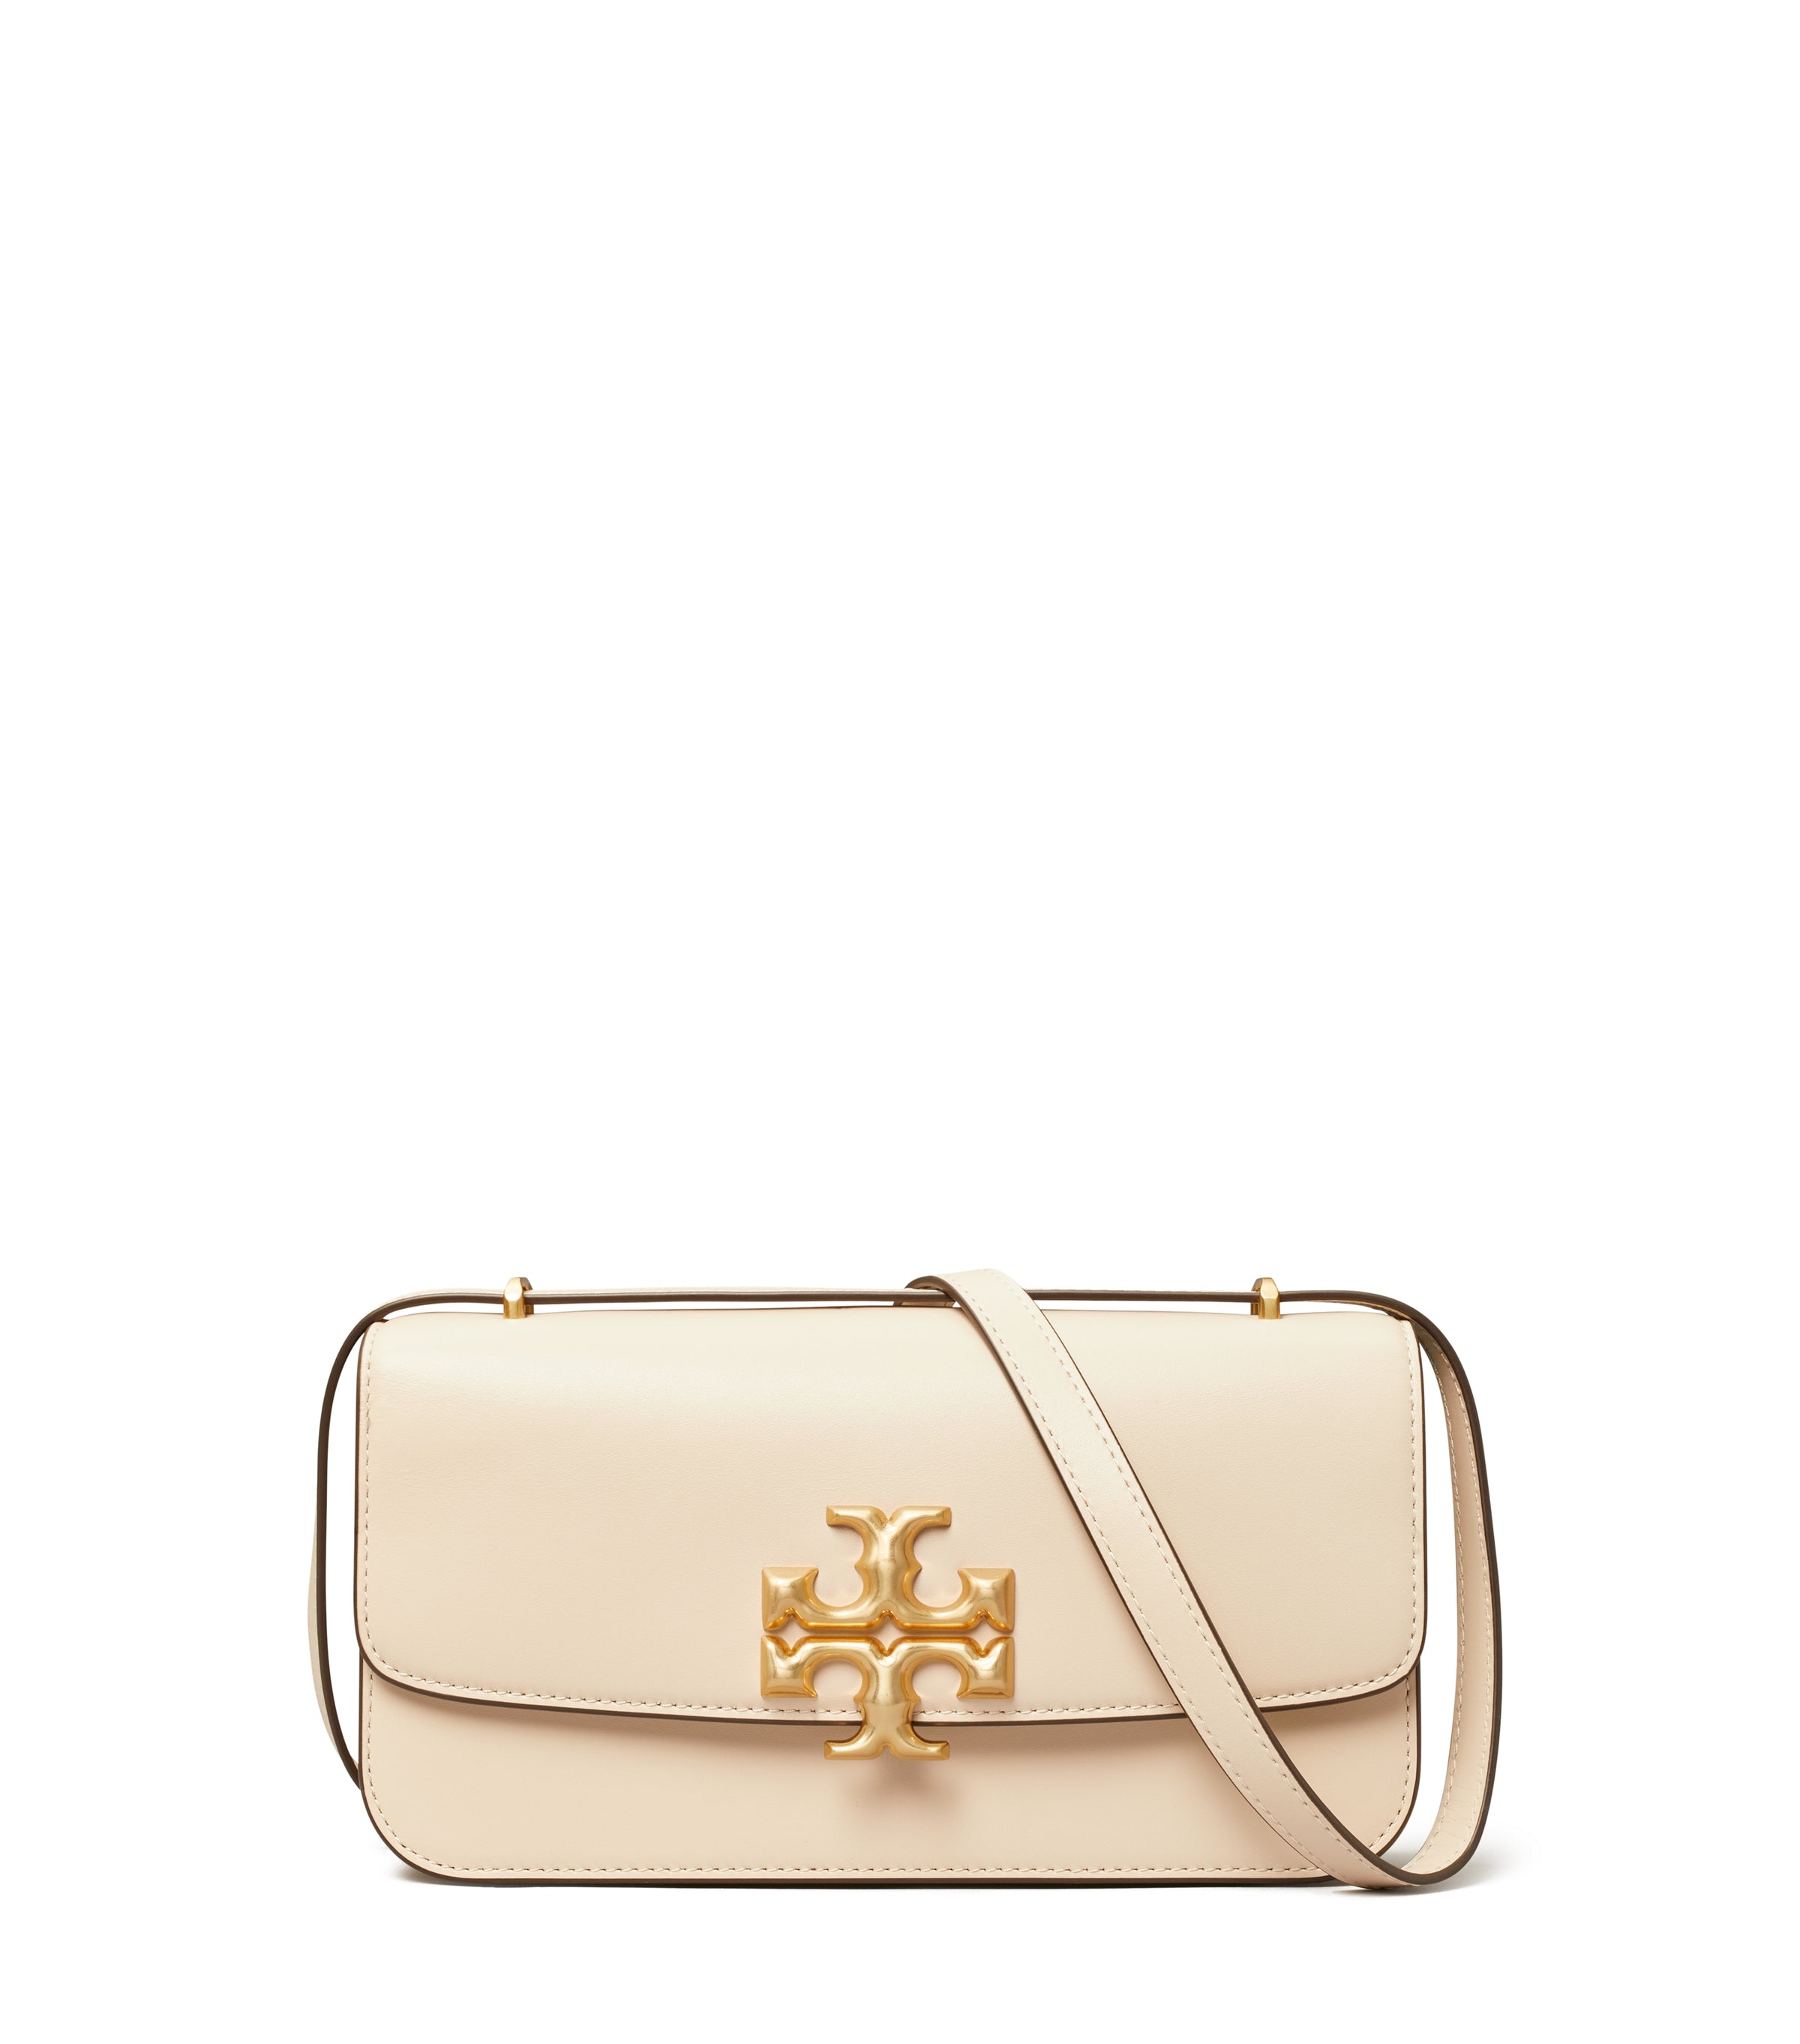 Tory Burch Small Eleanor Rectangular Convertible Leather Shoulder Bag